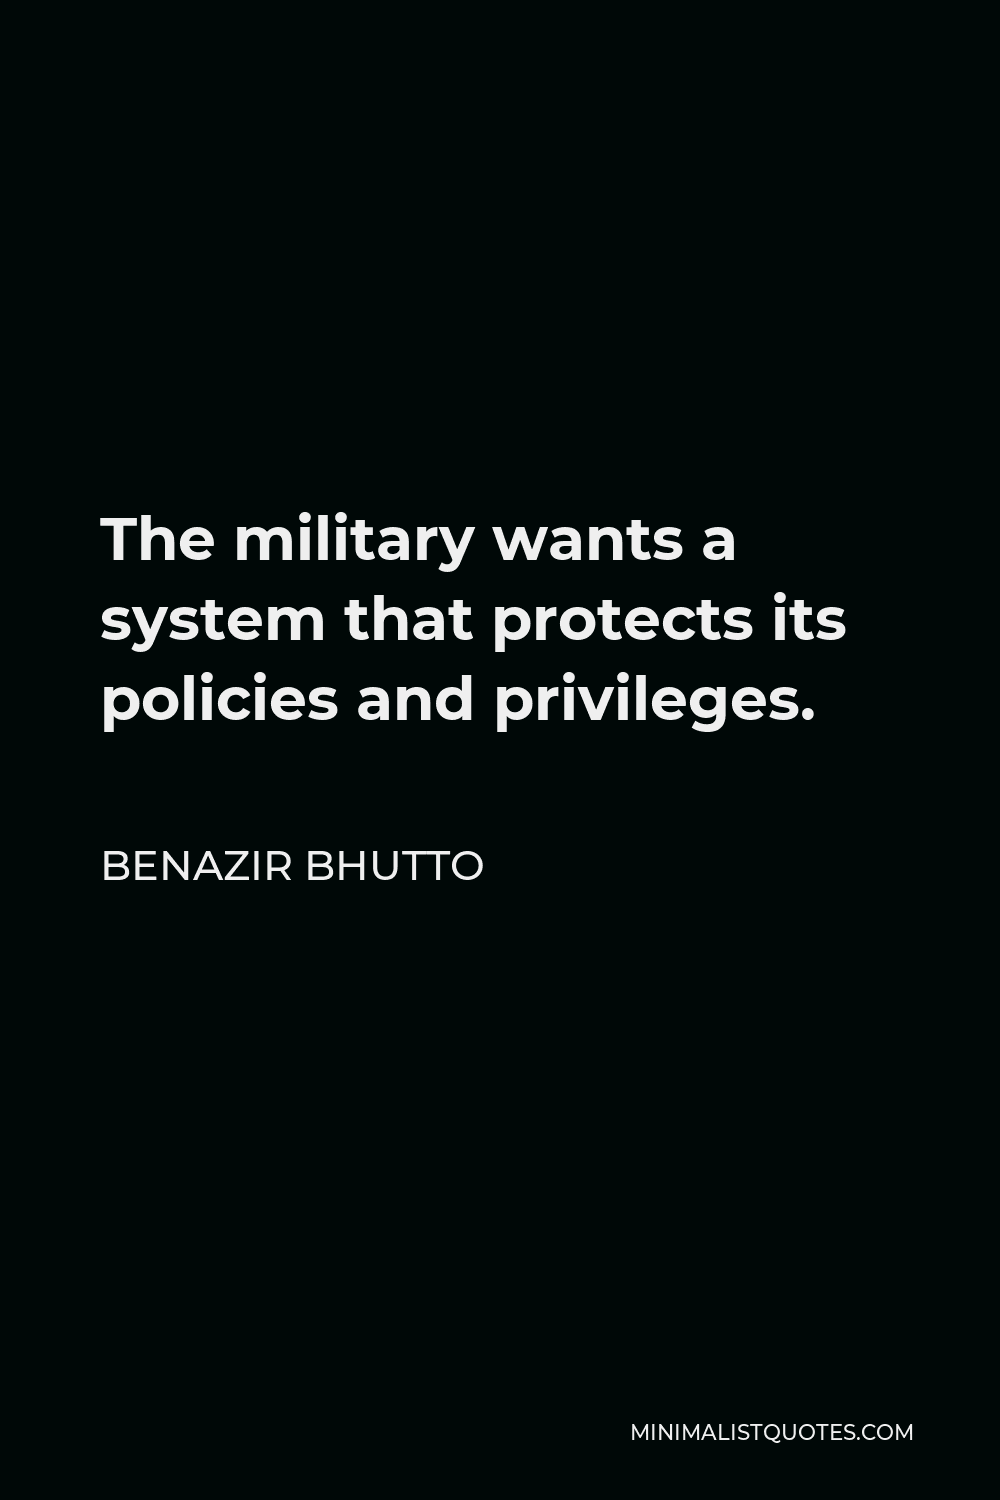 Benazir Bhutto Quote - The military wants a system that protects its policies and privileges.